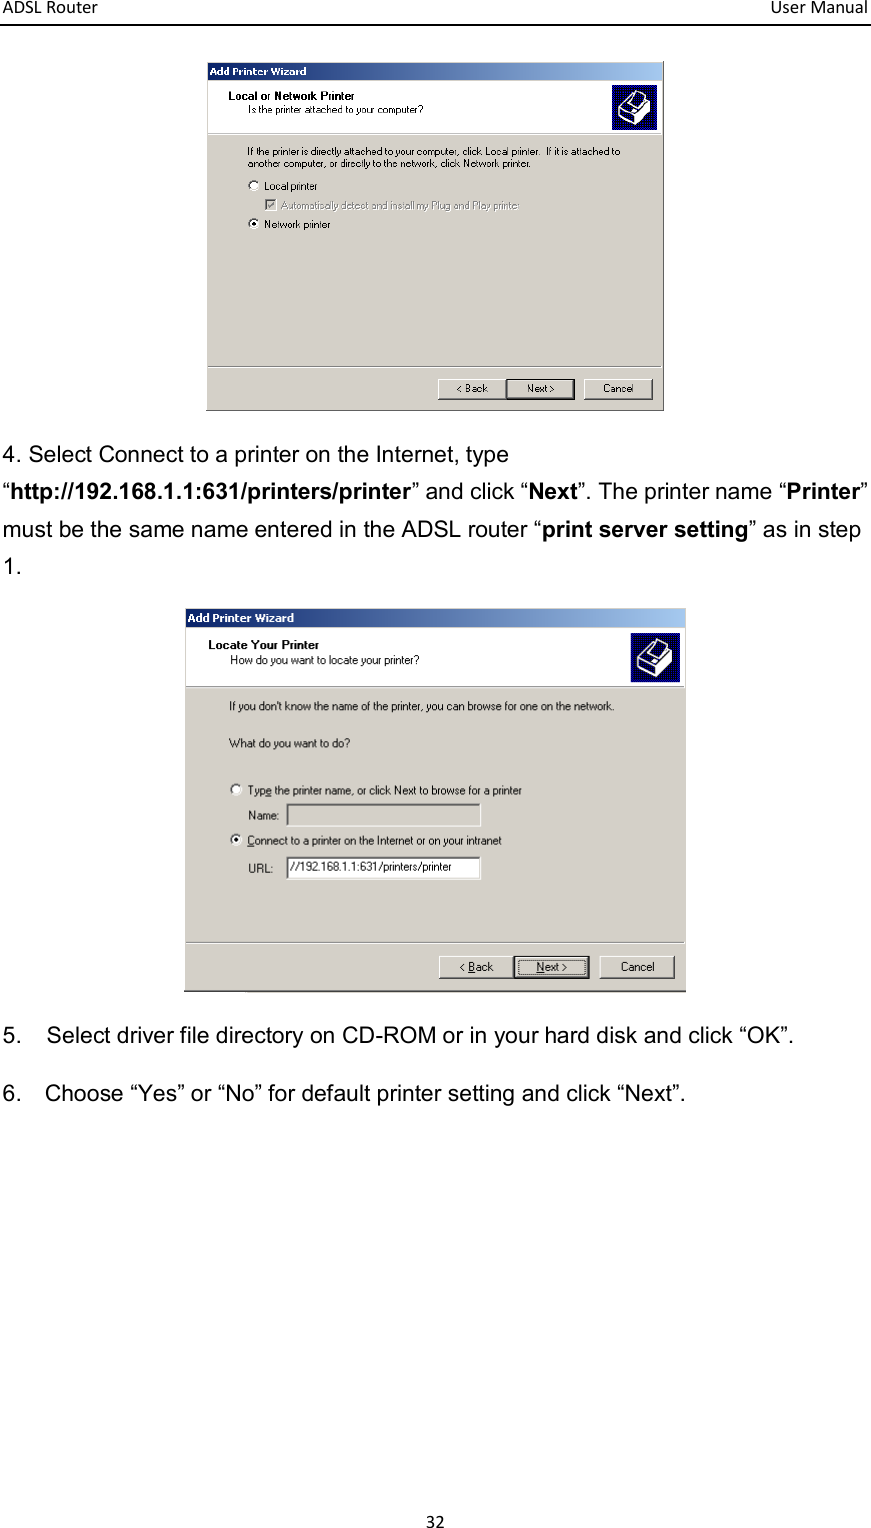 ADSL Router       User Manual 32  4. Select Connect to a printer on the Internet, type “http://192.168.1.1:631/printers/printer” and click “Next”. The printer name “Printer” must be the same name entered in the ADSL router “print server setting” as in step 1.  5.  Select driver file directory on CD-ROM or in your hard disk and click “OK”. 6.    Choose “Yes” or “No” for default printer setting and click “Next”. 